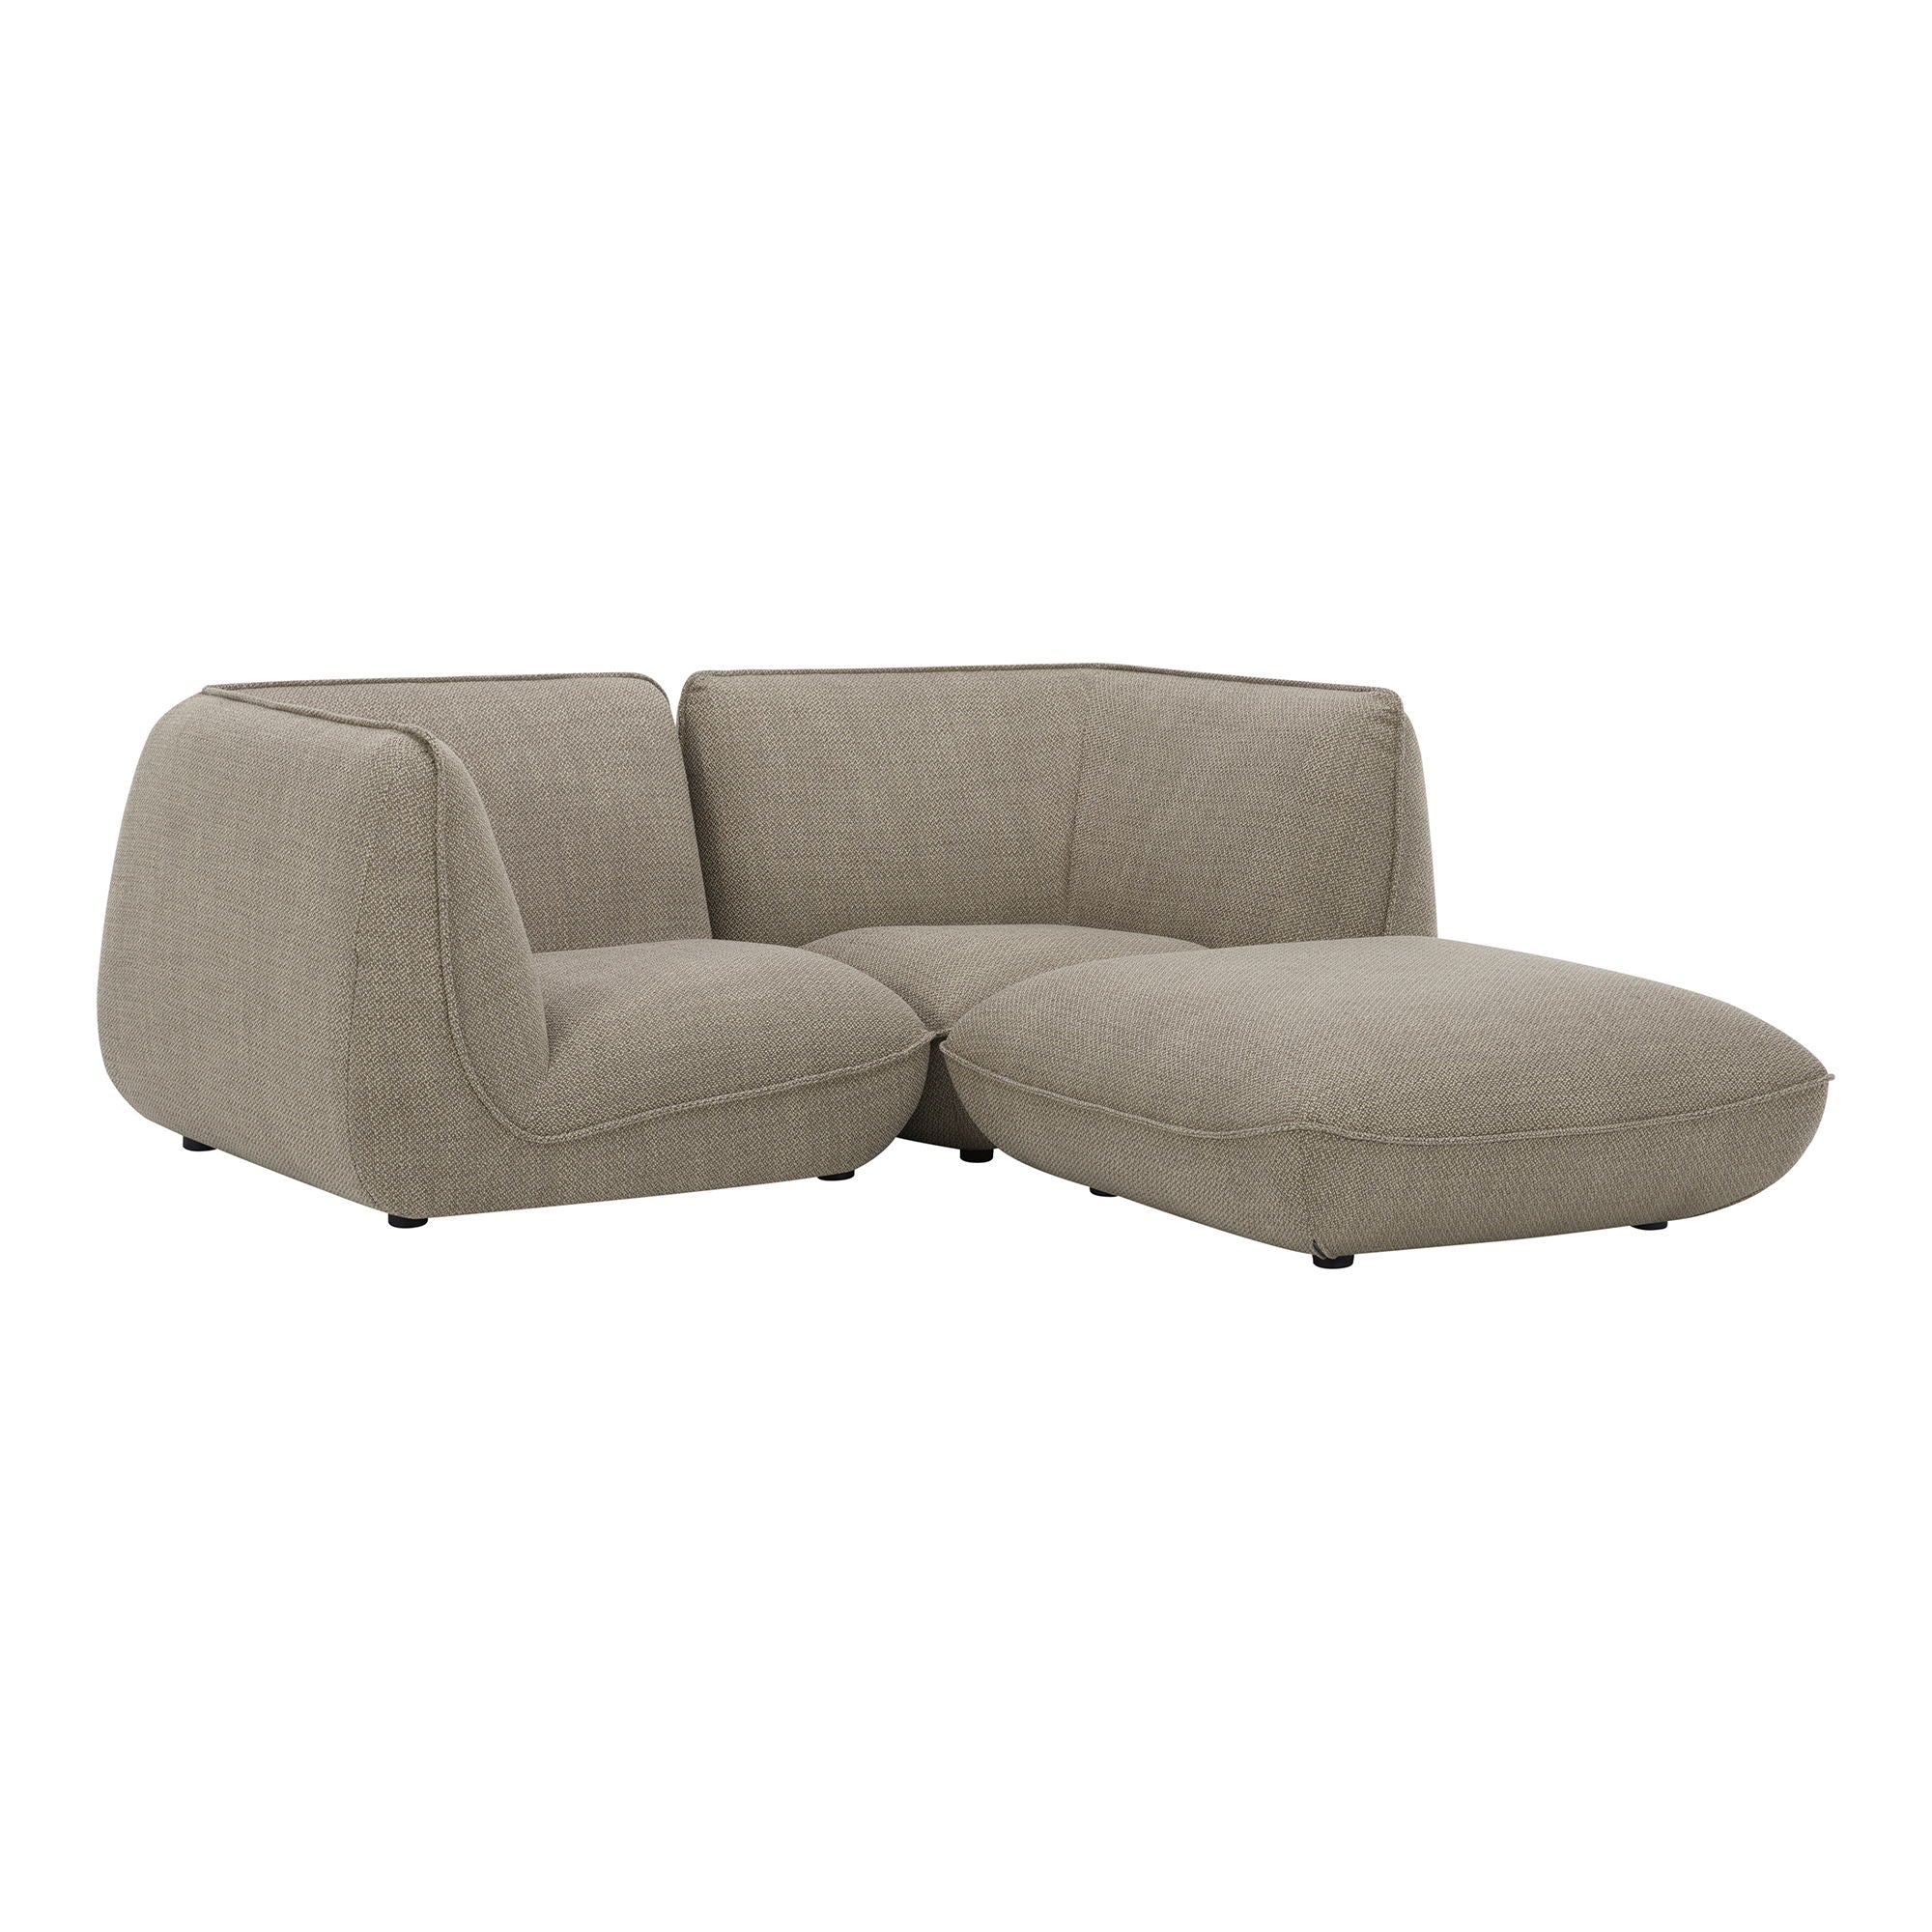 Zeppelin Nook Sectional - Gray, Speckled Texture-Stationary Sectionals-American Furniture Outlet